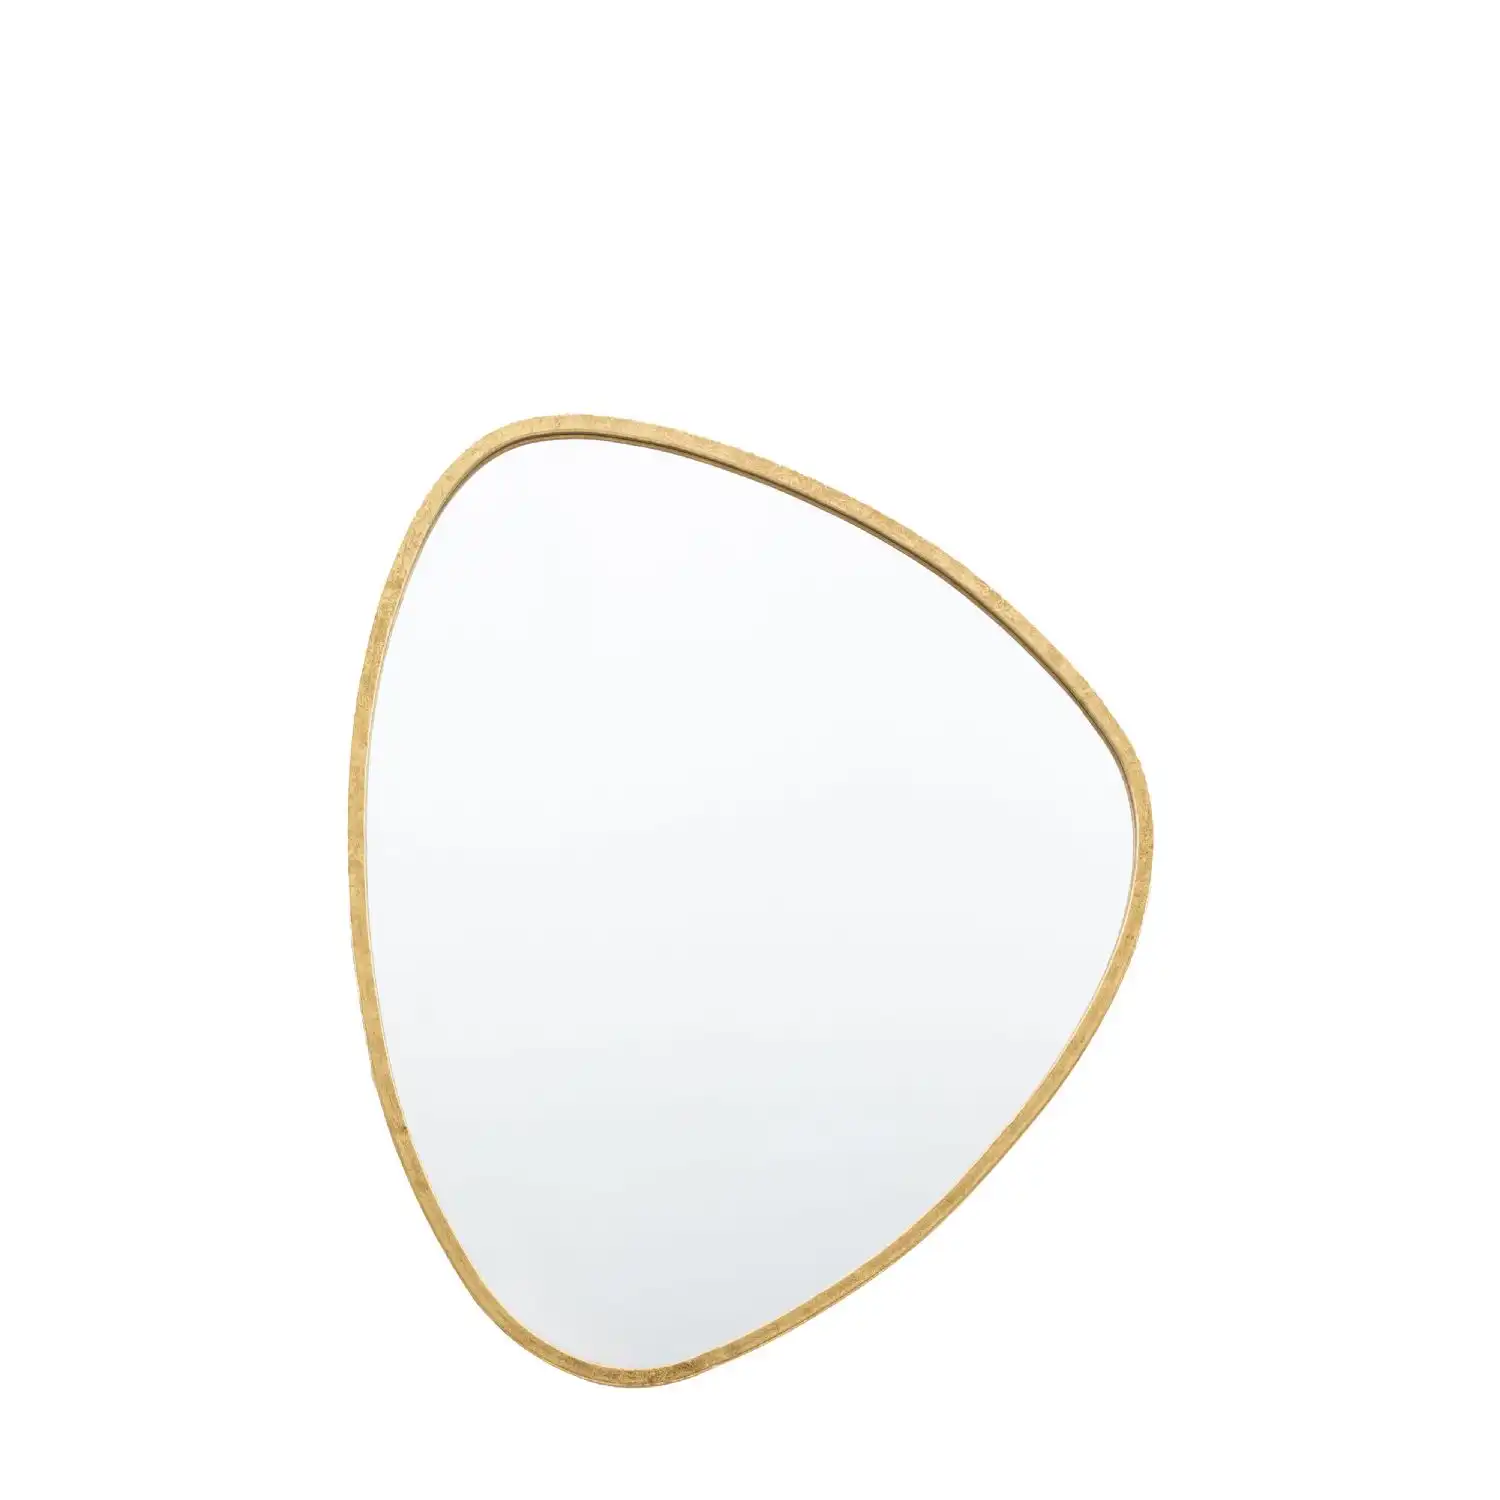 Glass Size mm W595 x H695 Mirror Gold Small